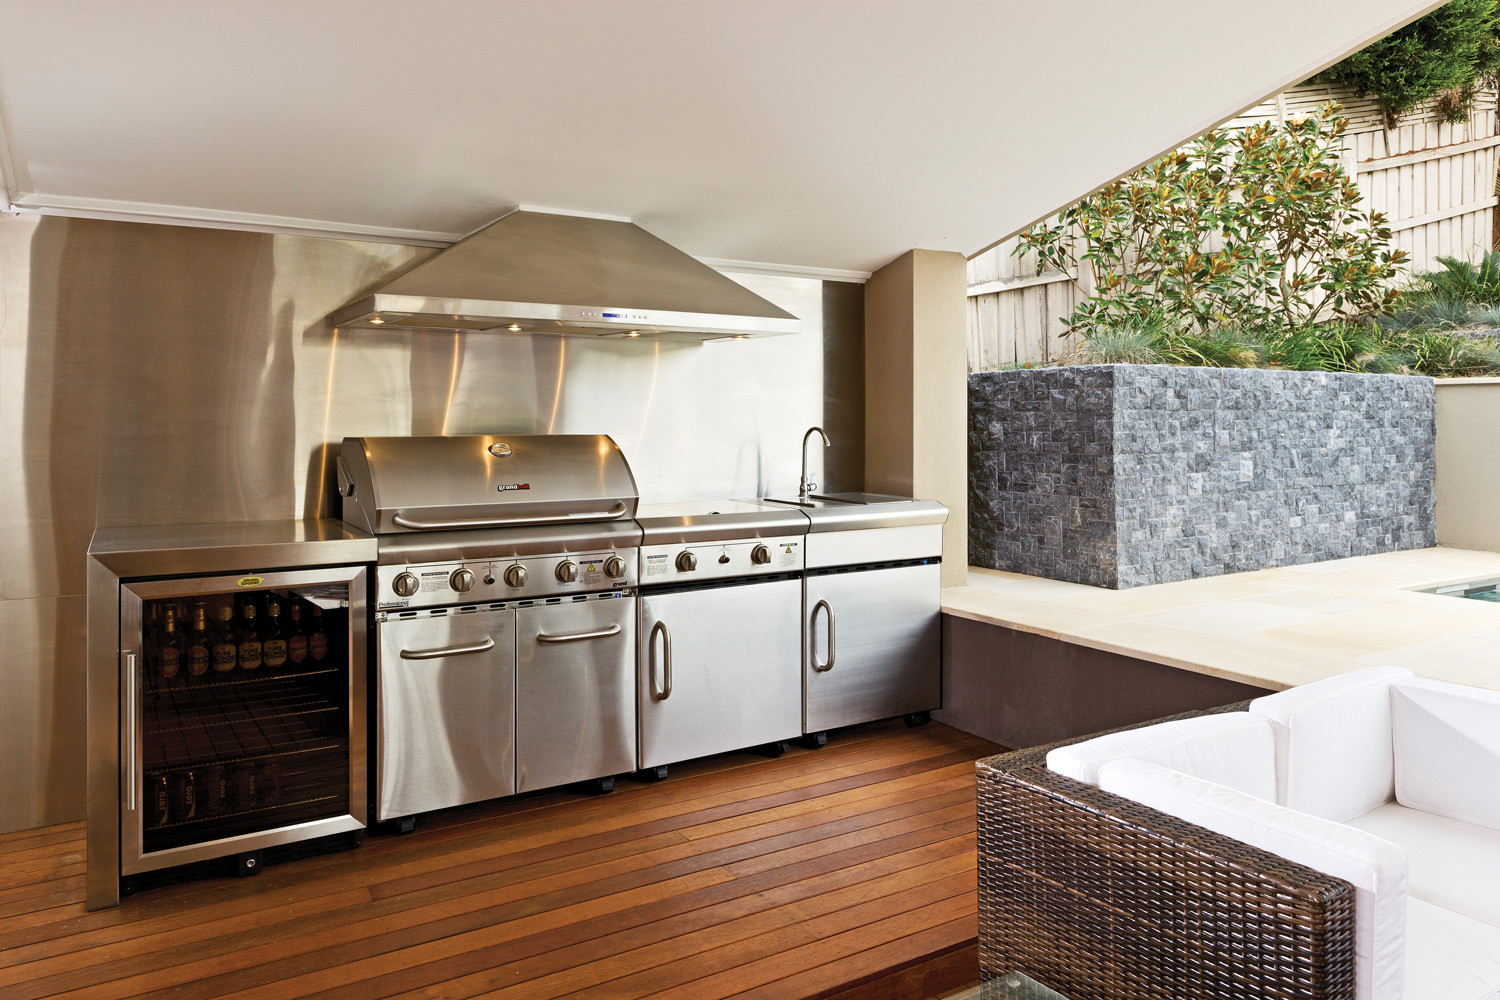 Stainless Steel Outdoor Kitchens
 Cooking capers A look at outdoor kitchens pletehome